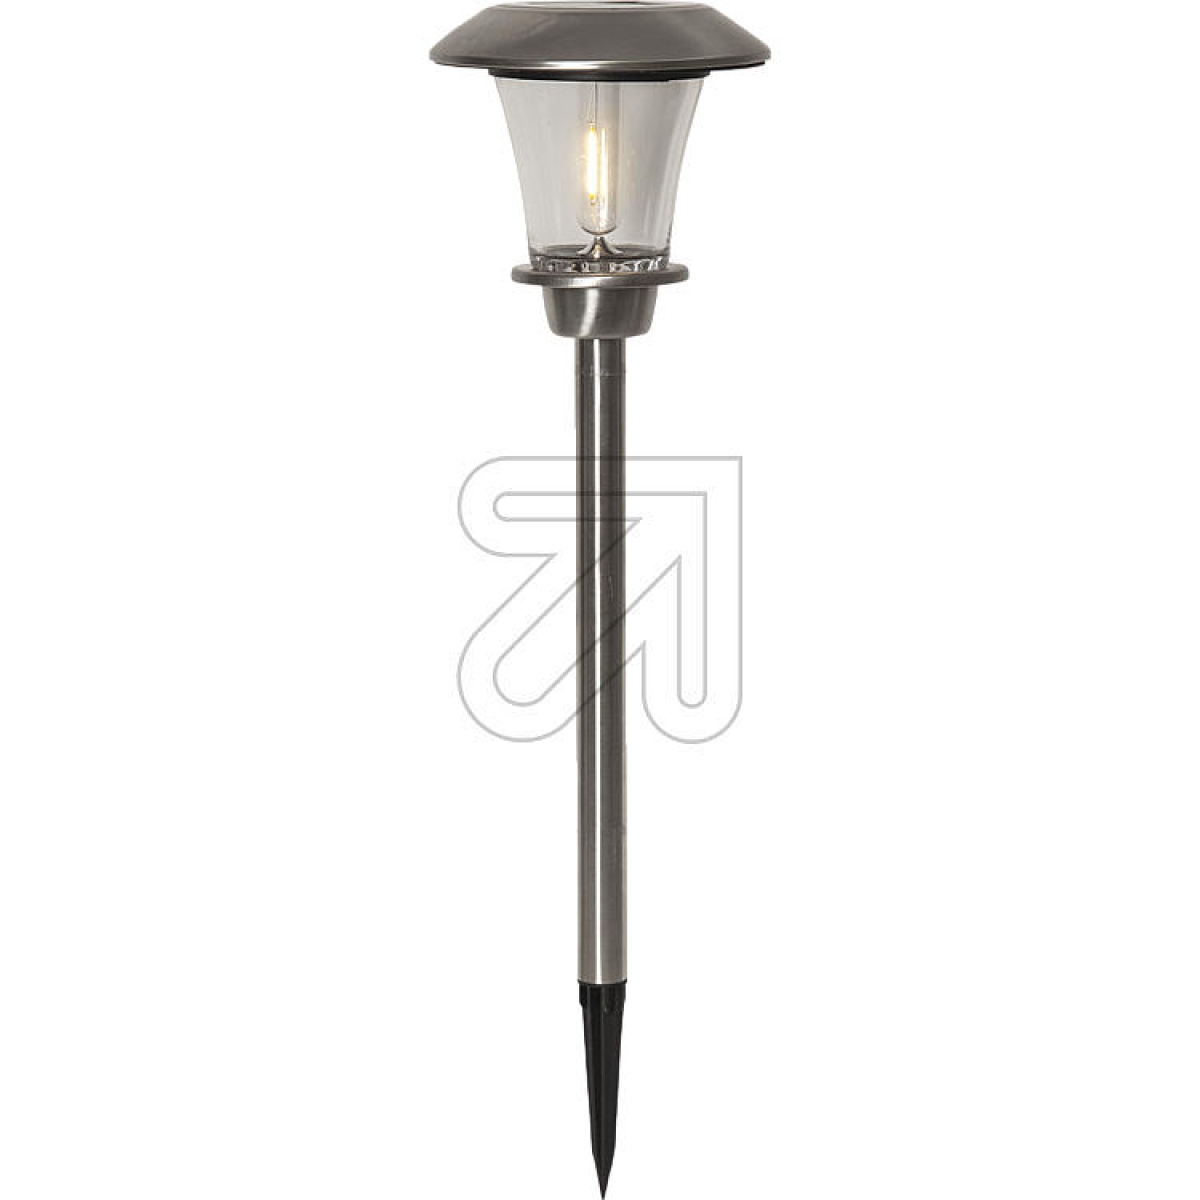 Star TradingLED solar path light Francis stainless steel 482-77Article-No: 620945